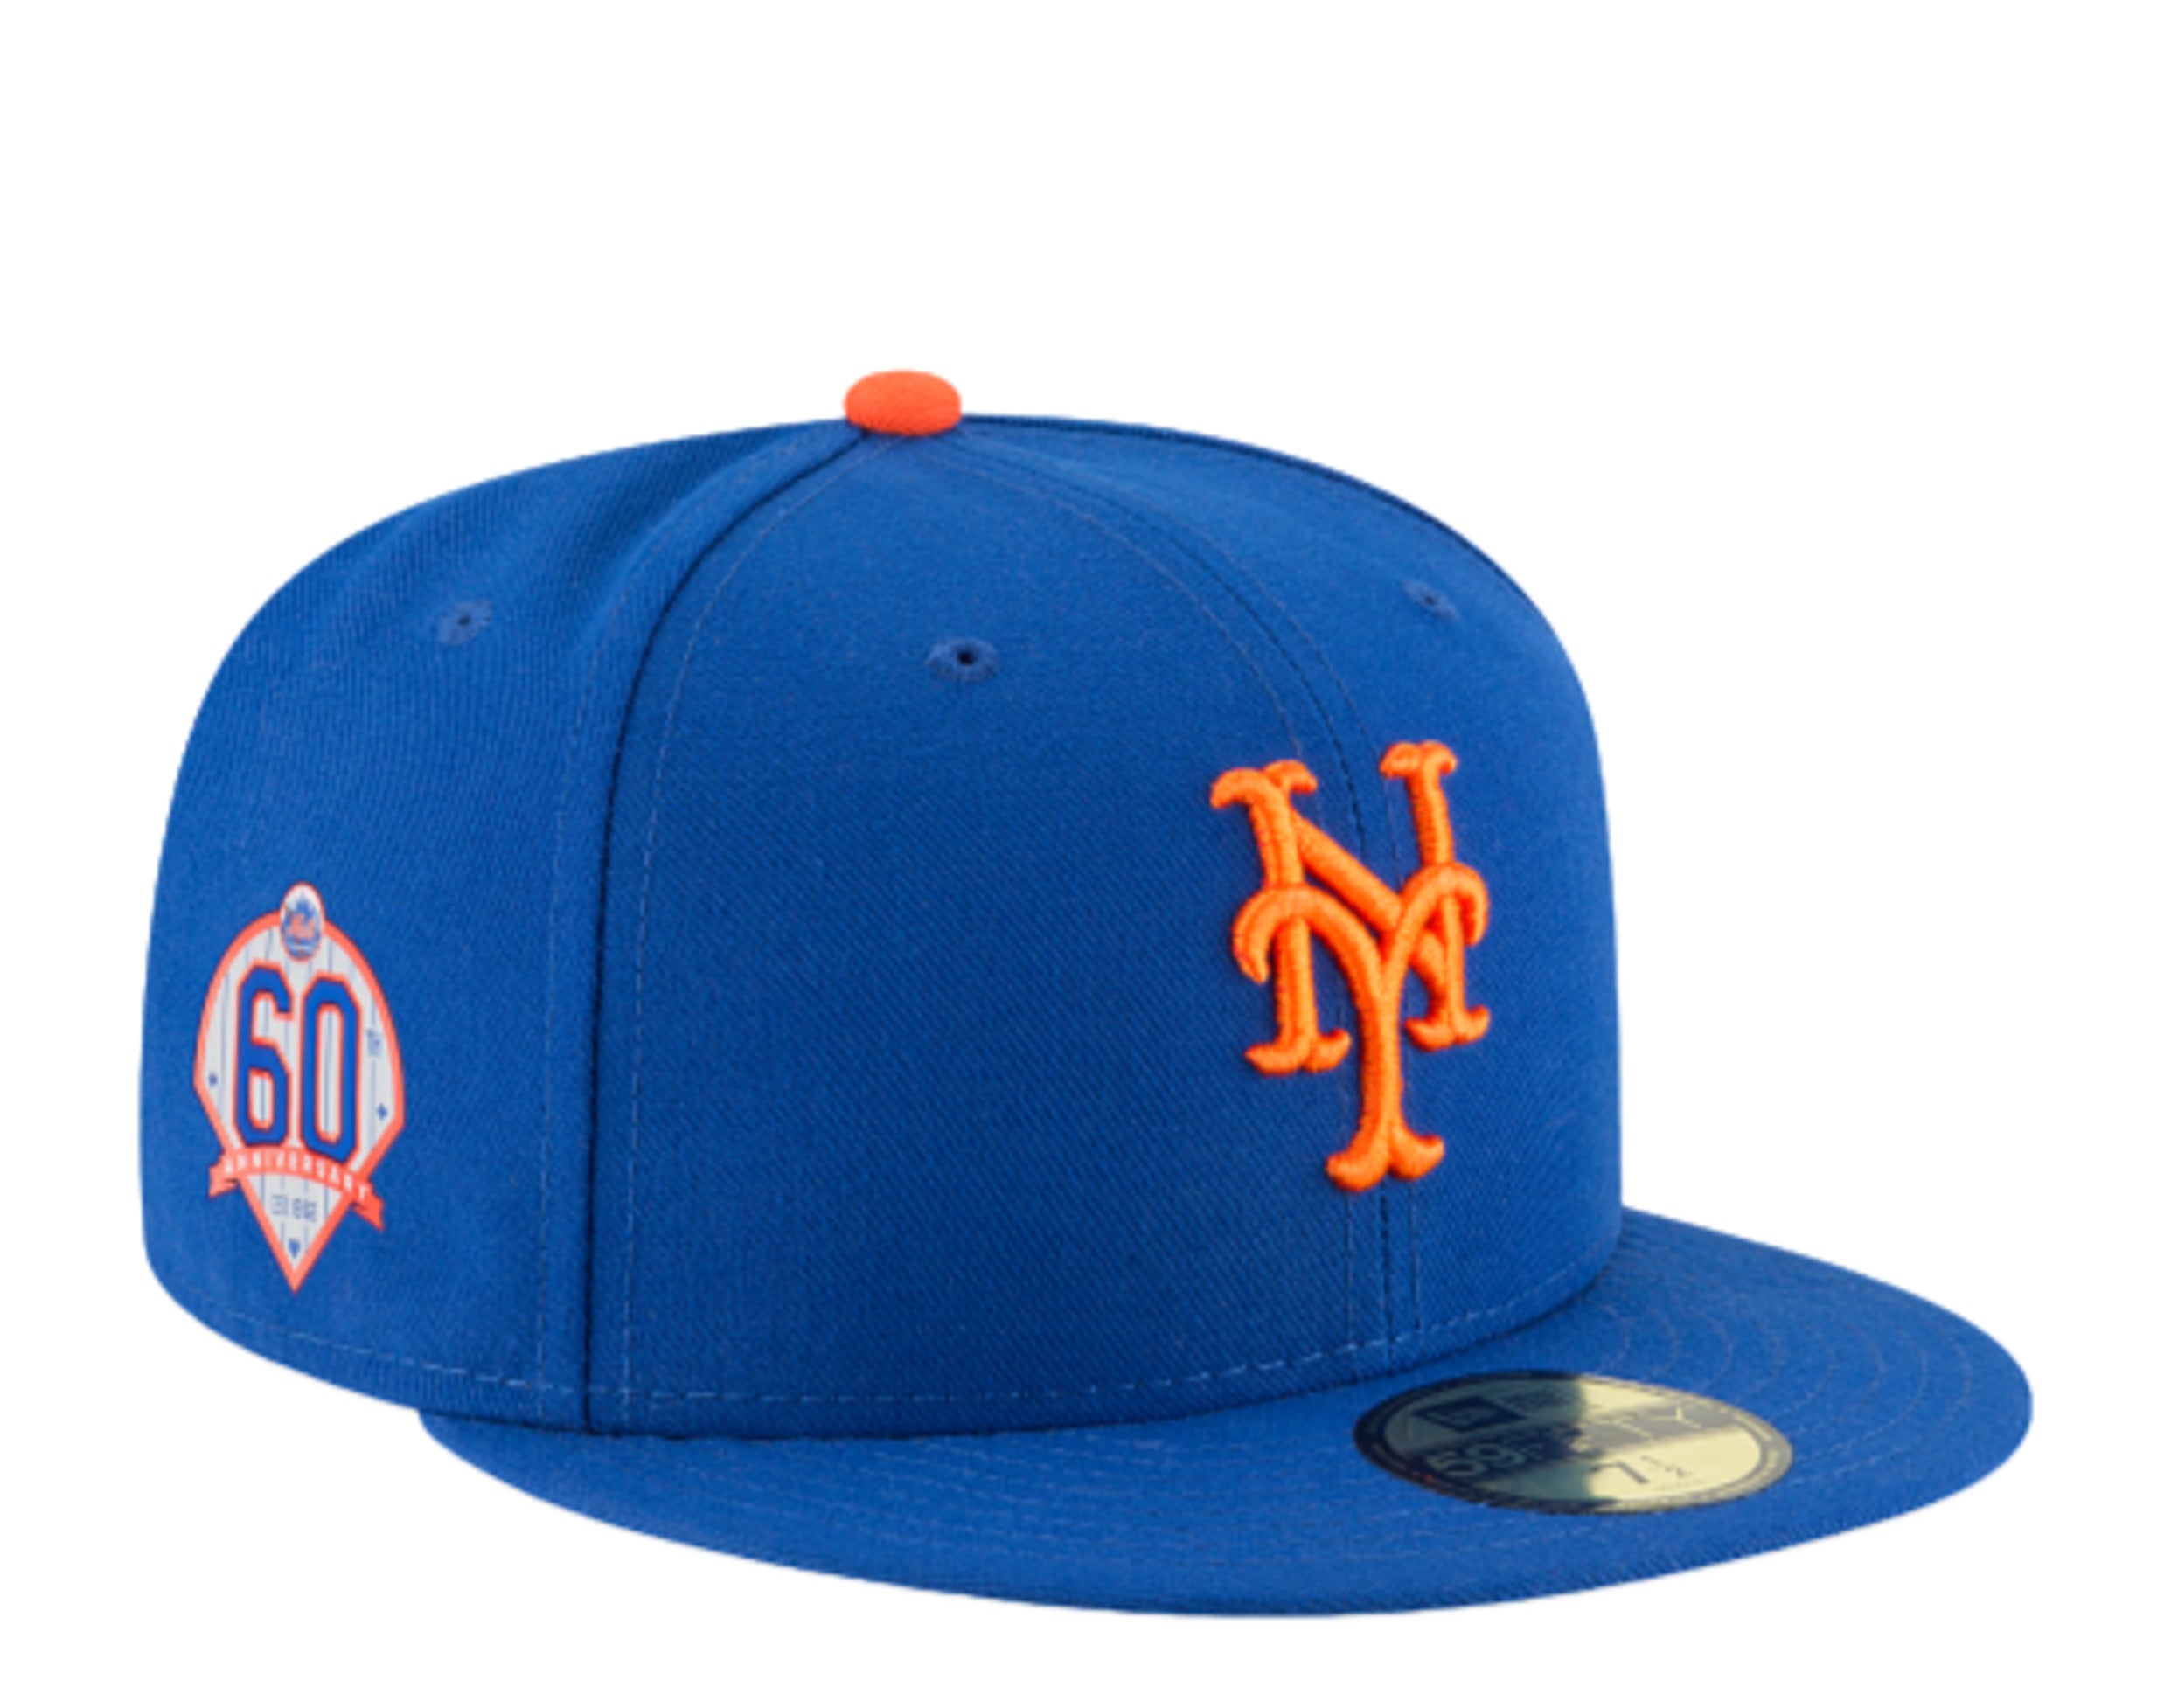 New York Mets ACT Accordingly Collection 60th Anniversary Patch Fitted Hat 7 5/8